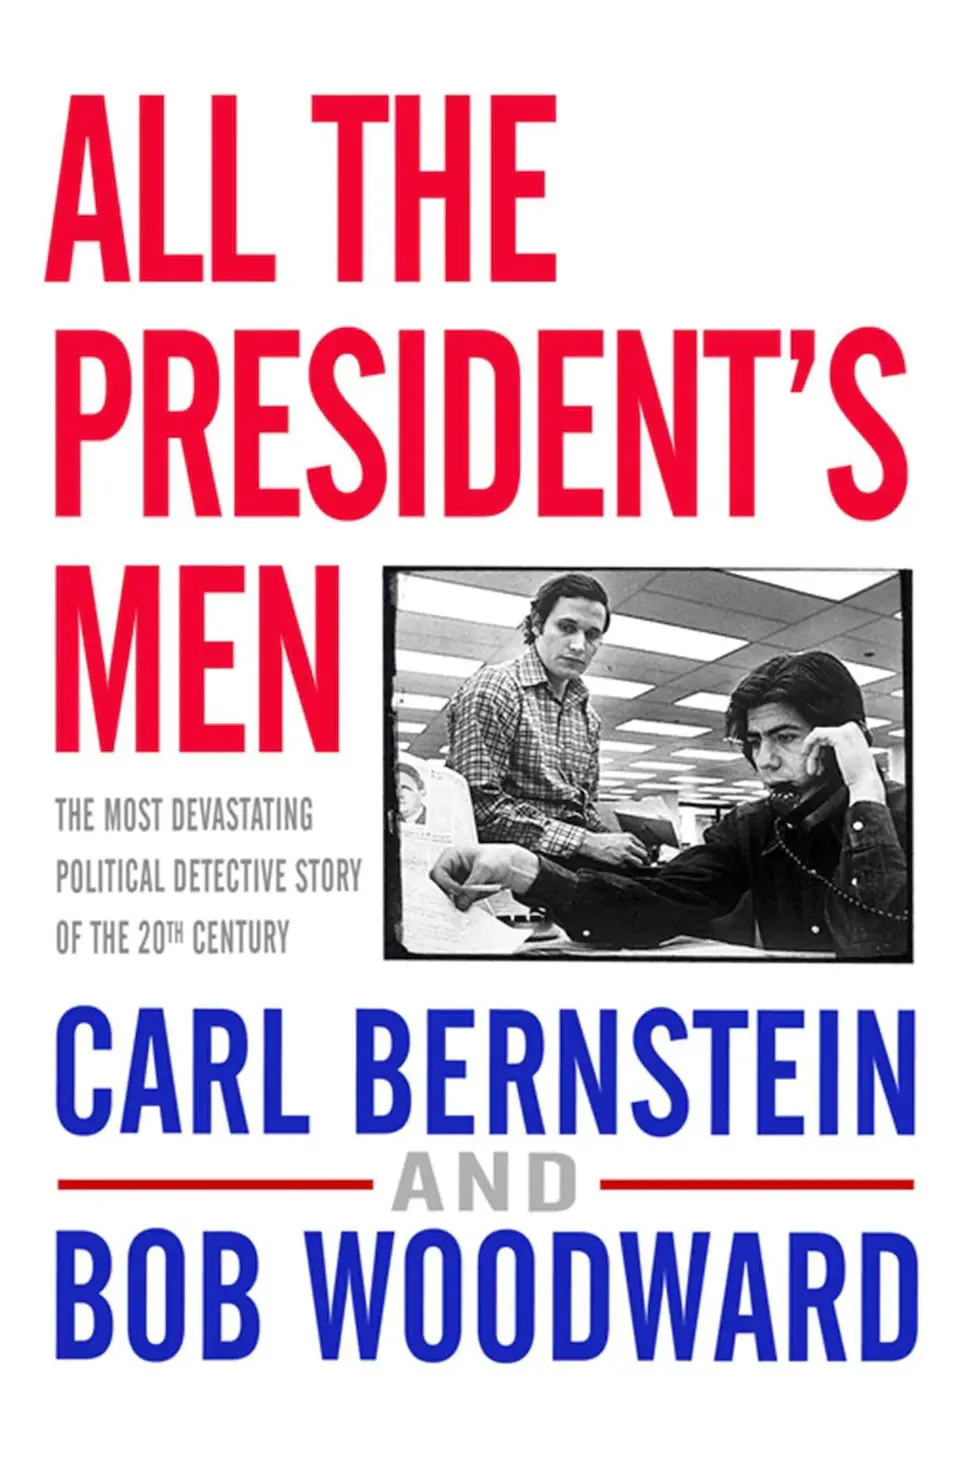 All the President's Men by Carl Bernstein & Bob Woodward finished on 2022 Jun 24